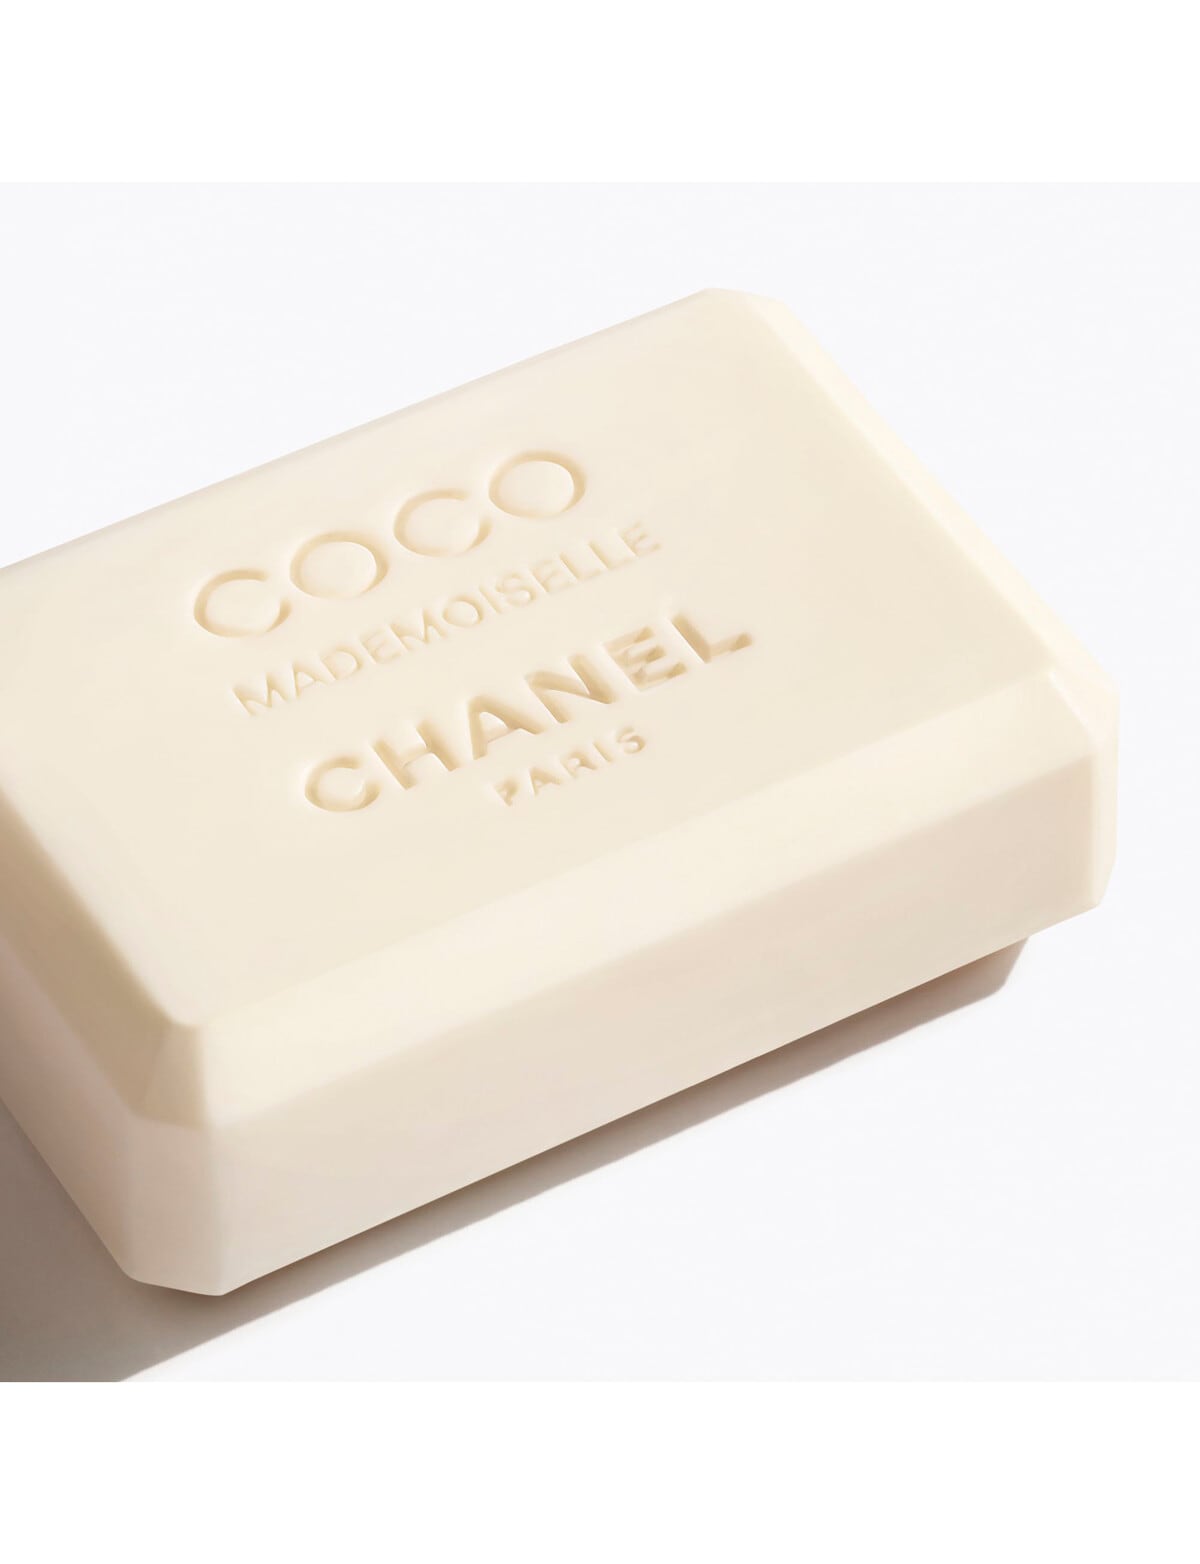 CHANEL COCO MADEMOISELLE GENTLE SOAP, 100G - Gift Sets